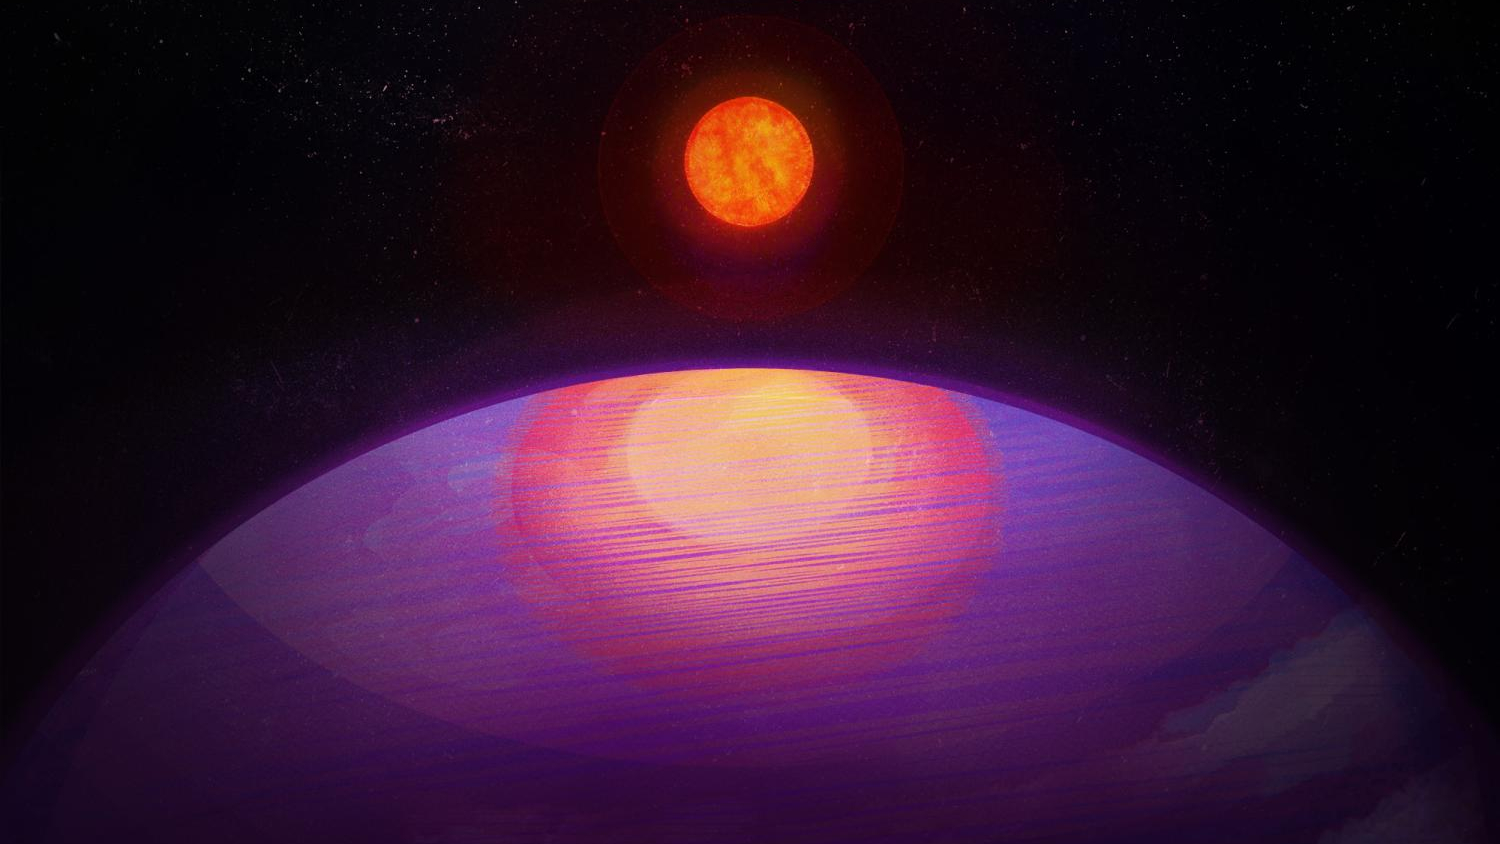 the top half of a large purple orb raises from the bottom like an eye peering upward, its diameter spanning the bottom of the image, near its top, lighter purple in the shape of an eye, with a red/orange iris and yellow pupil. a small orange/yellow sun hangs above in the center. Illustration shows a massive planet in orbit around a diminutive star.